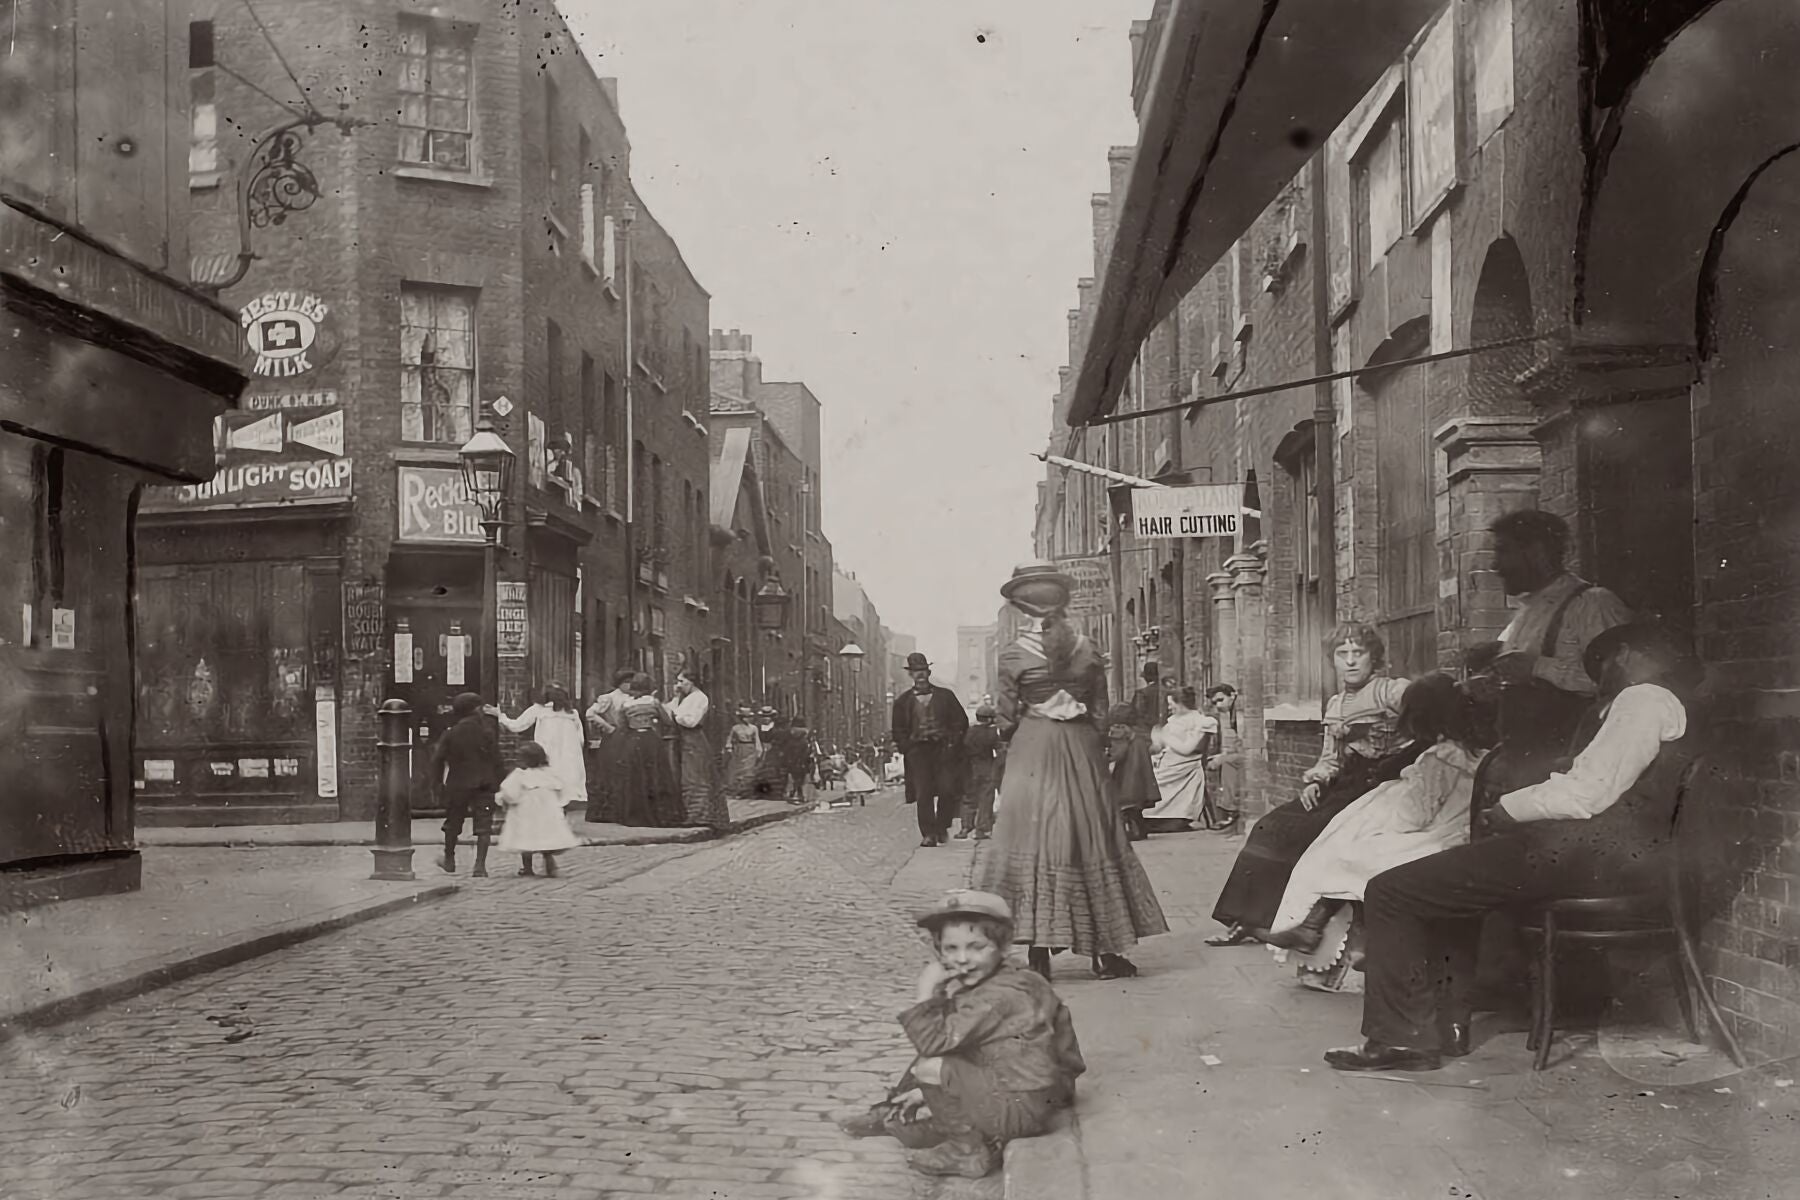 Street Holiday in London by Jack London - 1902